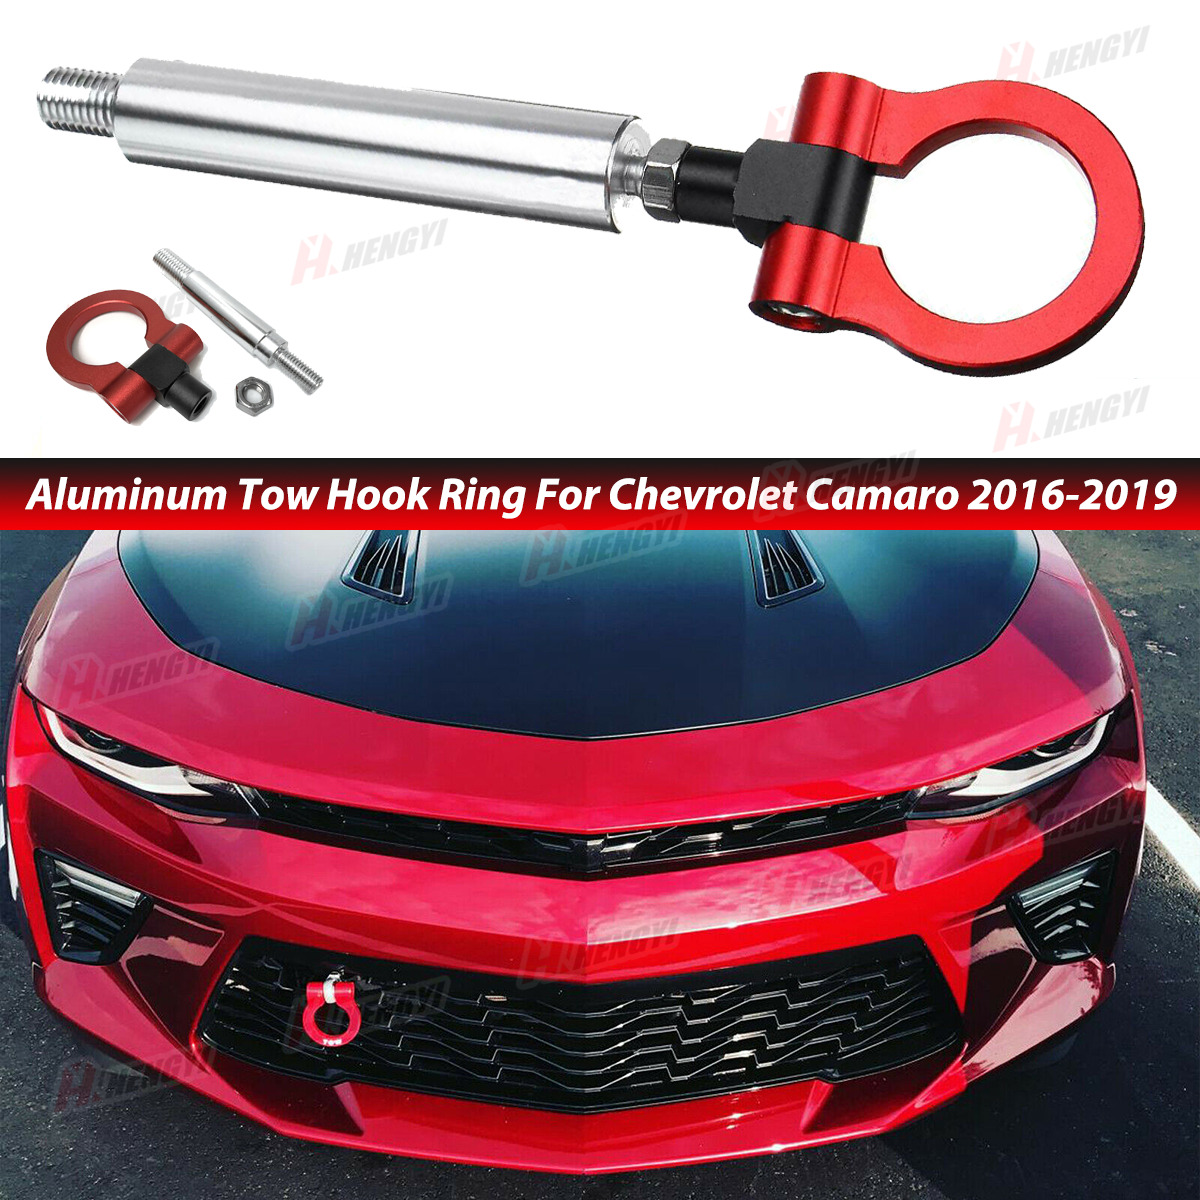 Red Sport Racing Style Tow Hook For Chevrolet Camaro SS ZL1 2016-2019 Aluminum